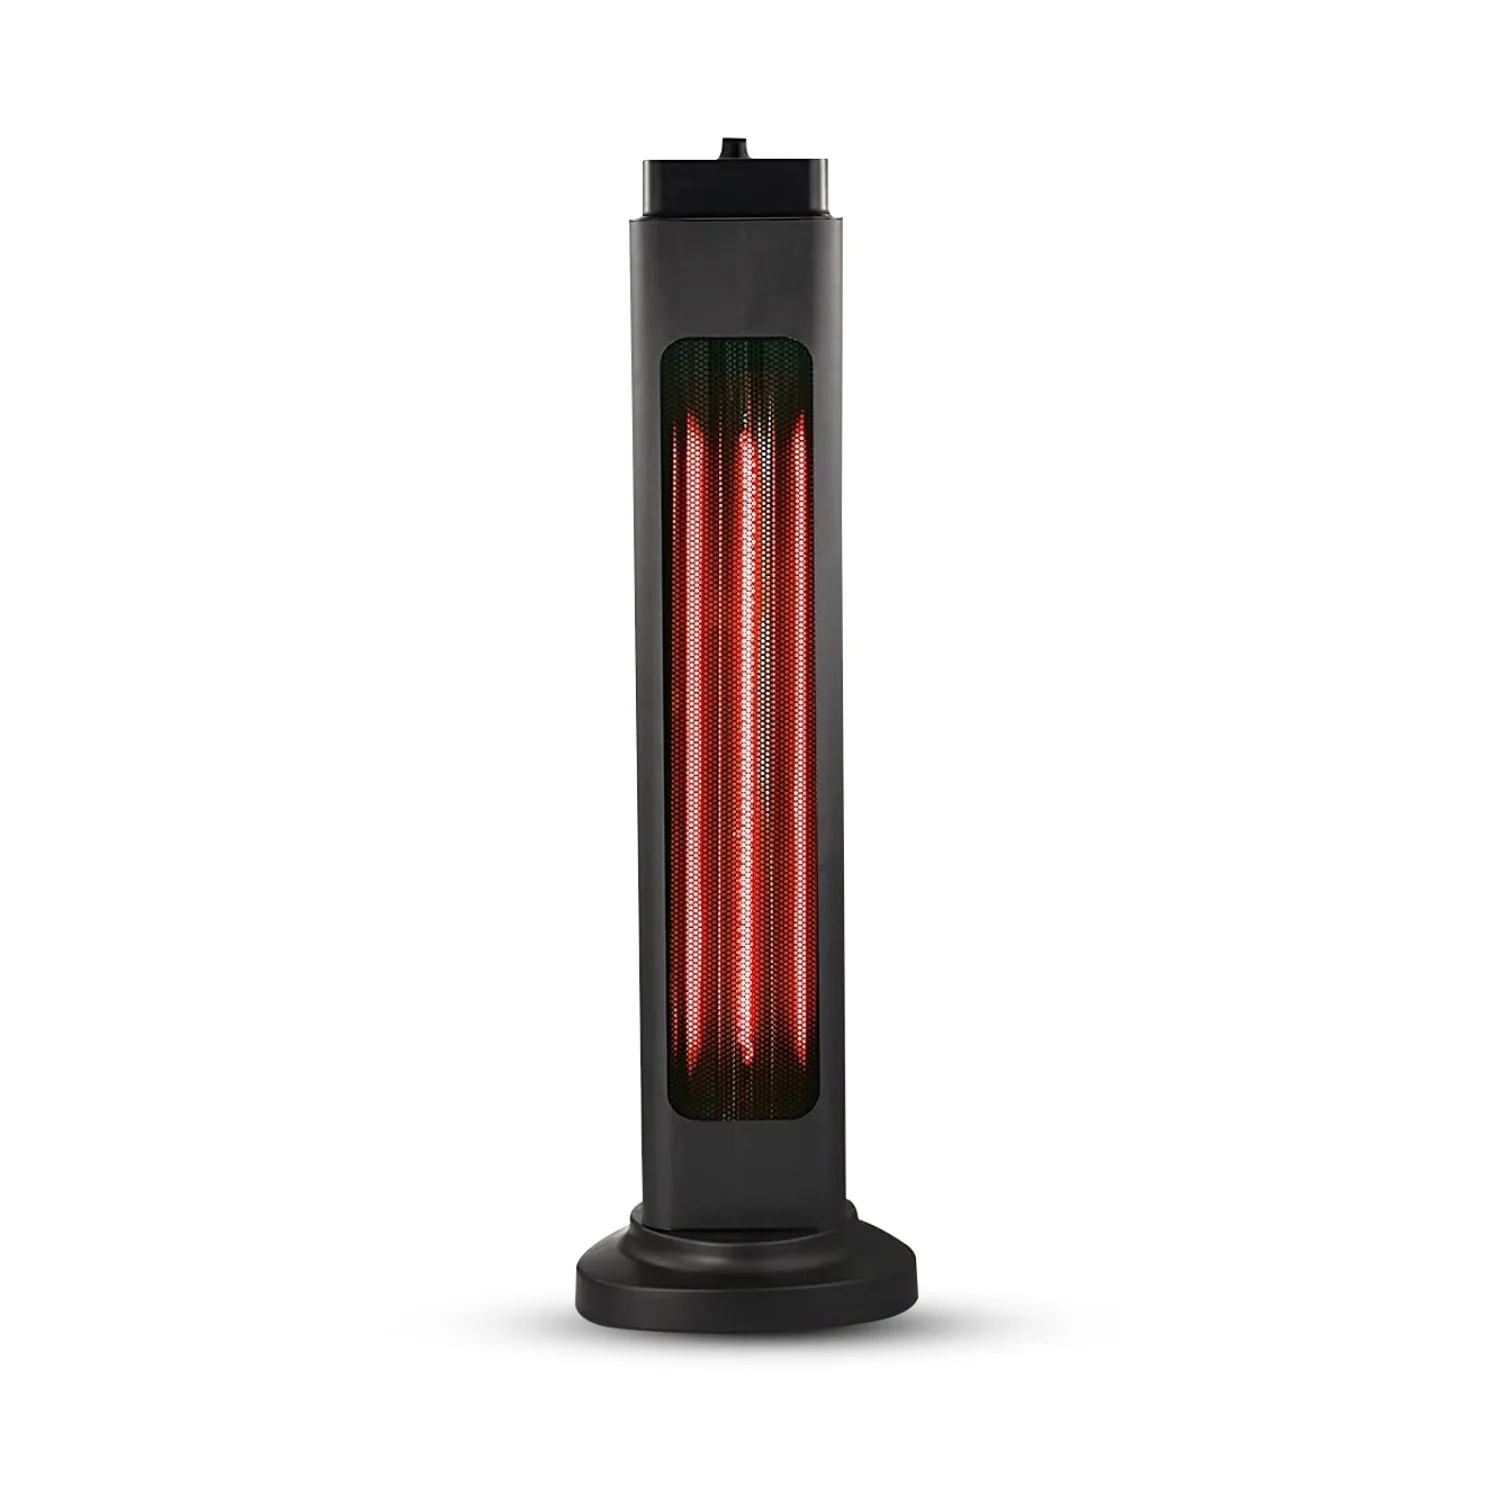 Ener-J Portable Infrared Heater 600W/1200W with Oscillation IH1032 - West Midland Electrics | CCTV & Electrical Wholesaler